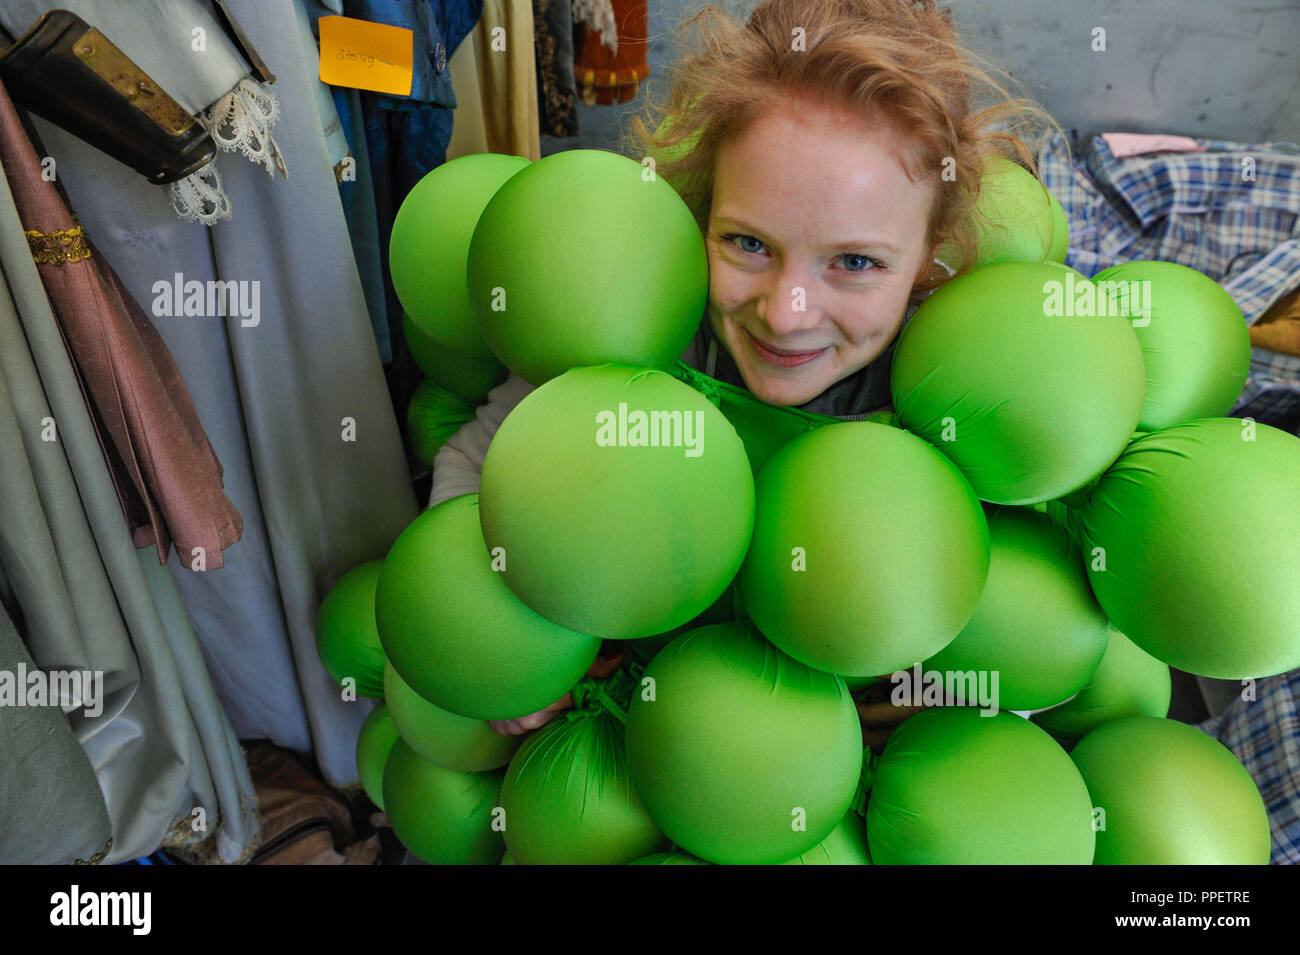 Actress Friederike Ott presents a grape costume at an auction at the theatre flea market on Marstallplatz. The Munich Residenz Theater sells props and costumes from its collection. Stock Photo